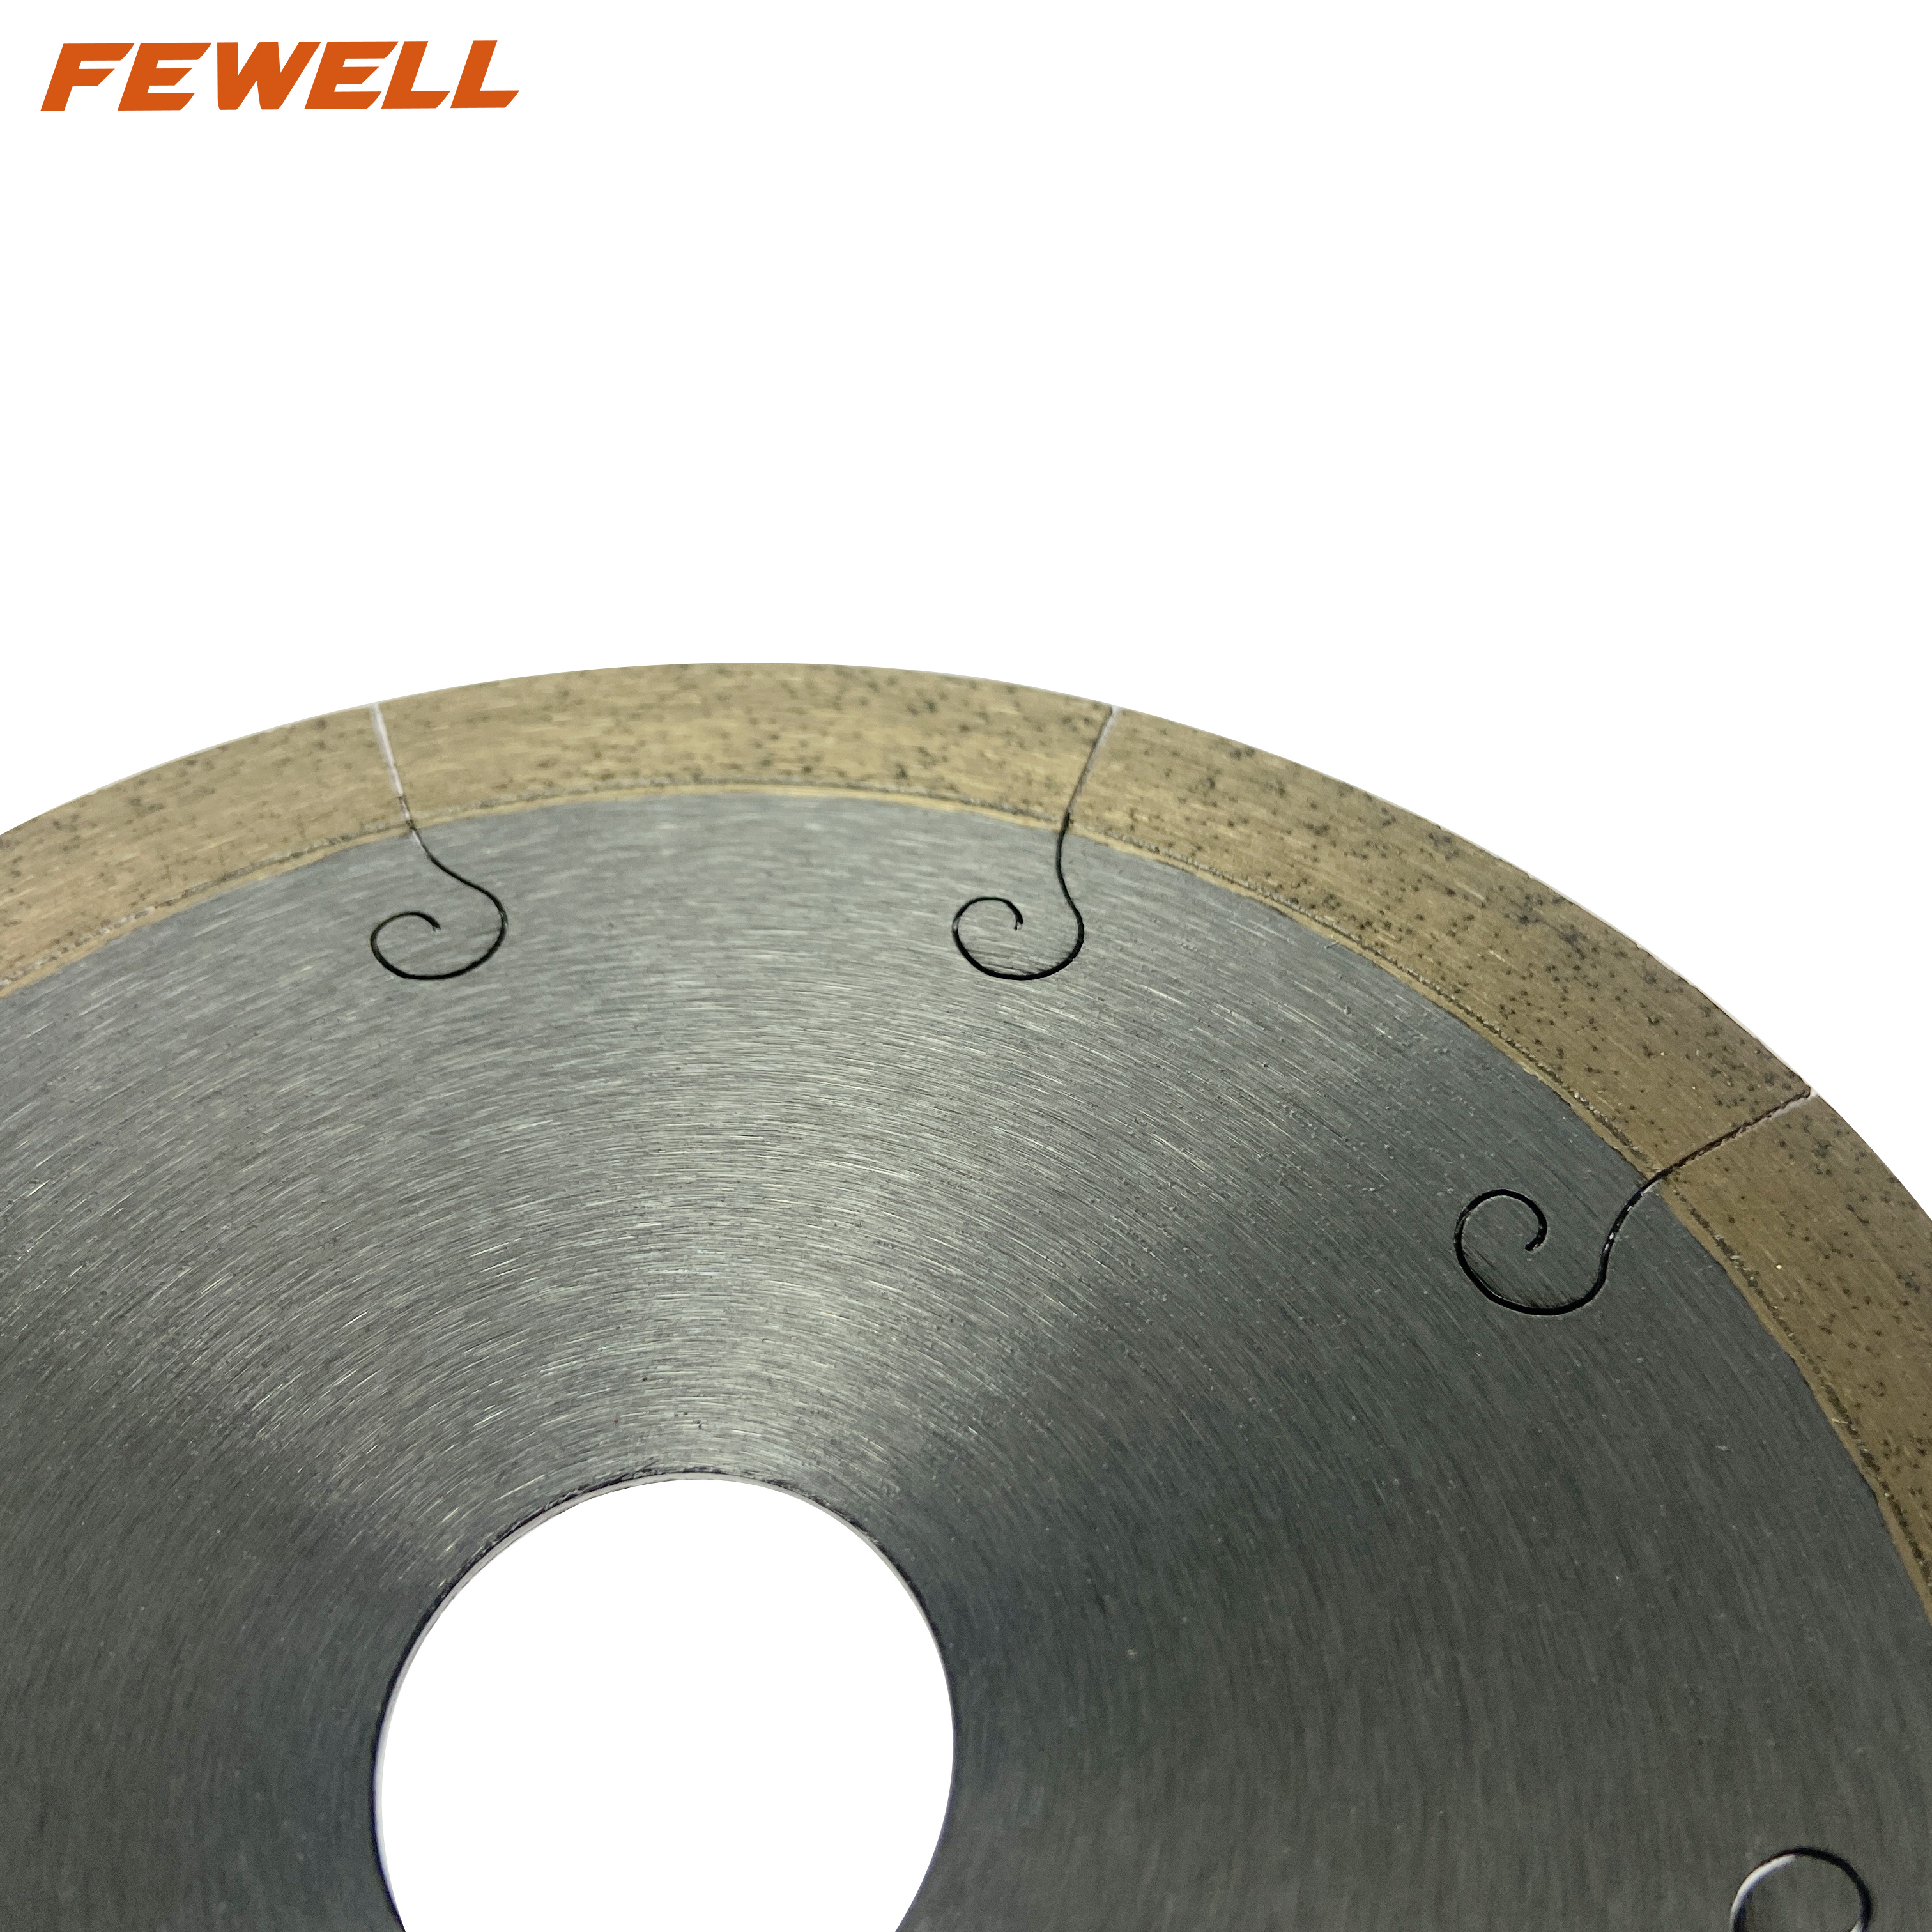 High quality Hot Press 5、8、9、10inch 125-250*10mm J-slot continuous rim diamond saw blade for cutting ceramic tile marble porcelain